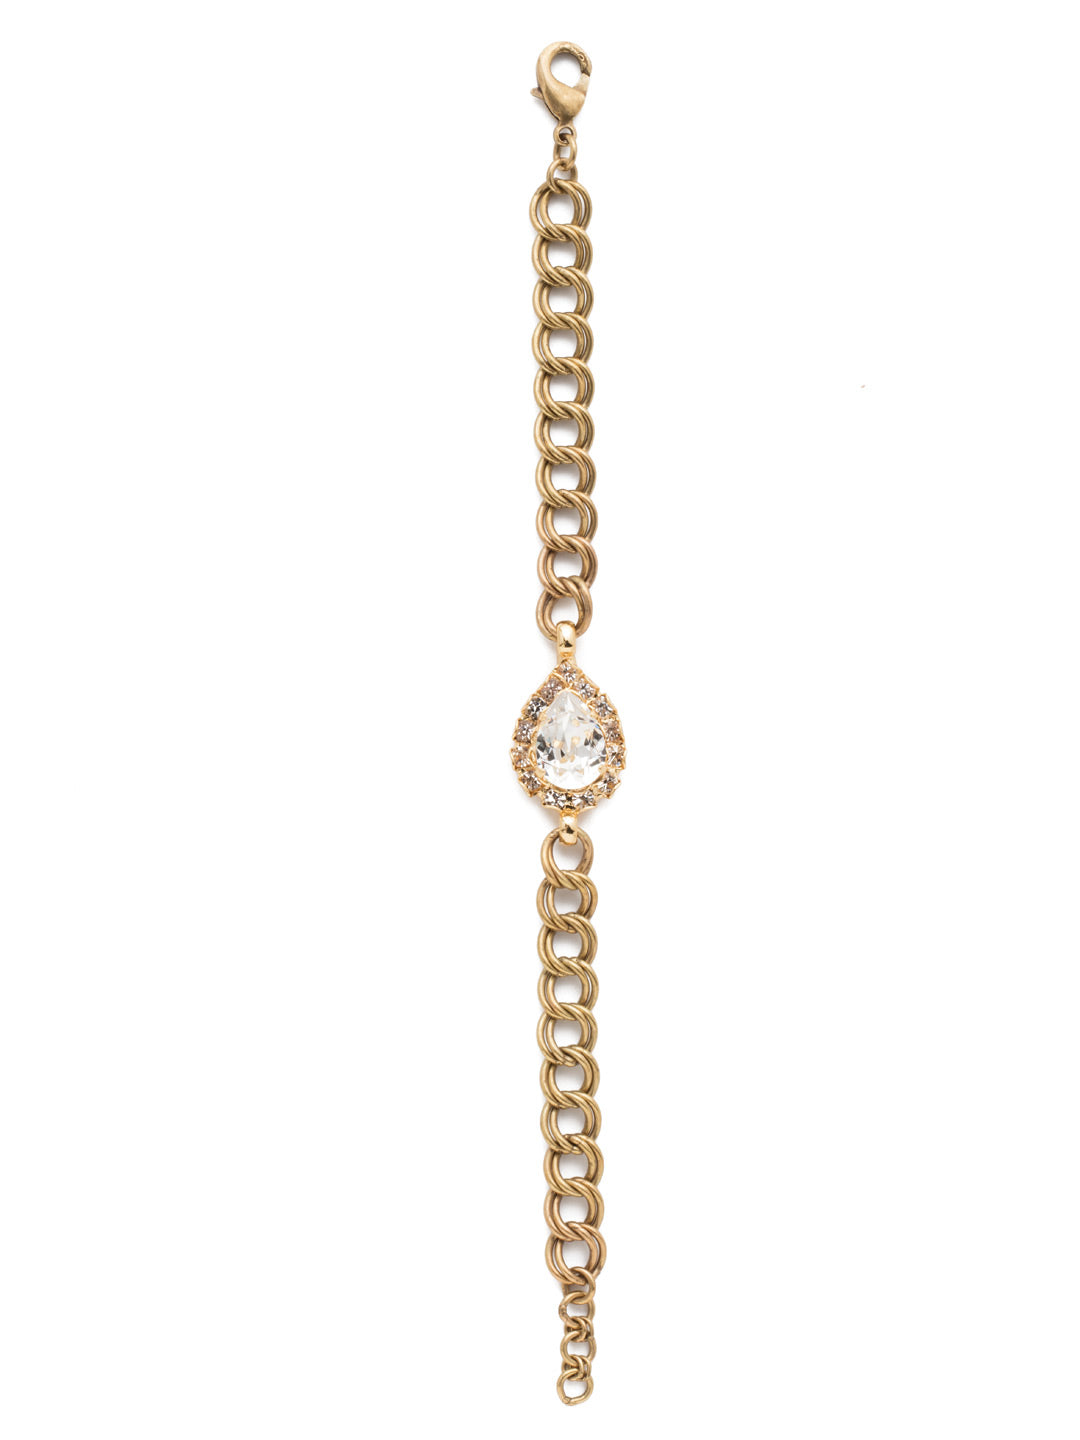 Mallory Tennis Bracelet - 4BET2MXCRY - <p>Our Mallory Tennis Bracelet is just the piece for when you want to show off edgy metal detail and sparkle too. Its center signature pearl crystal is a standout. From Sorrelli's Crystal collection in our Mixed Metal finish.</p>